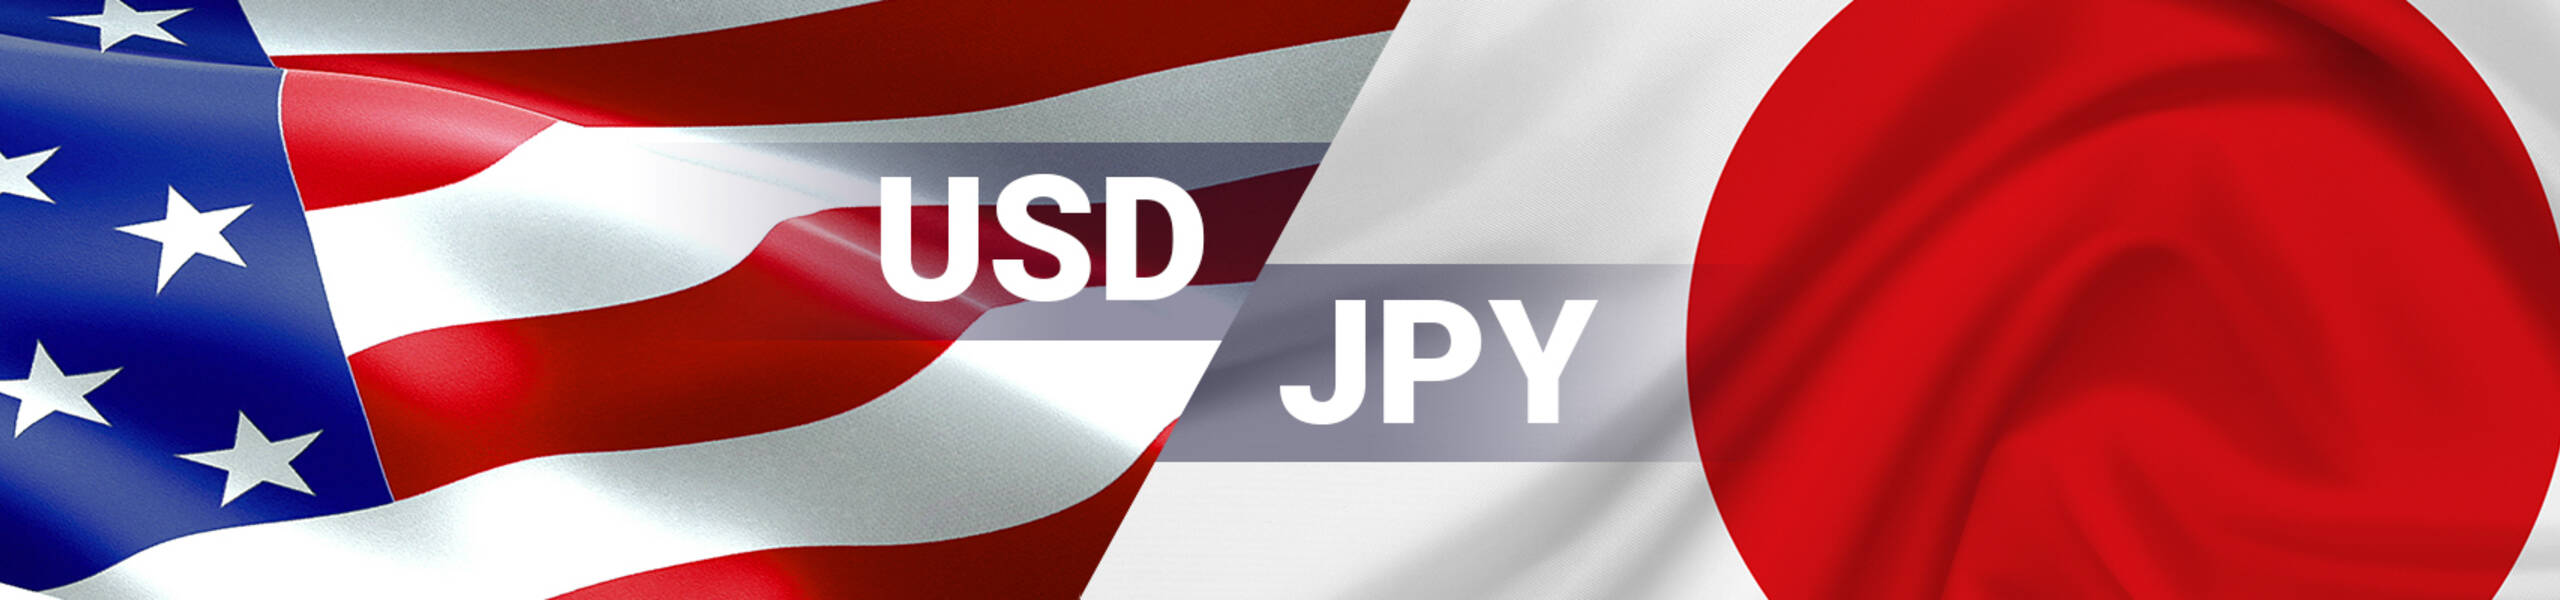 USD/JPY Dailyレポート 2017/09/13